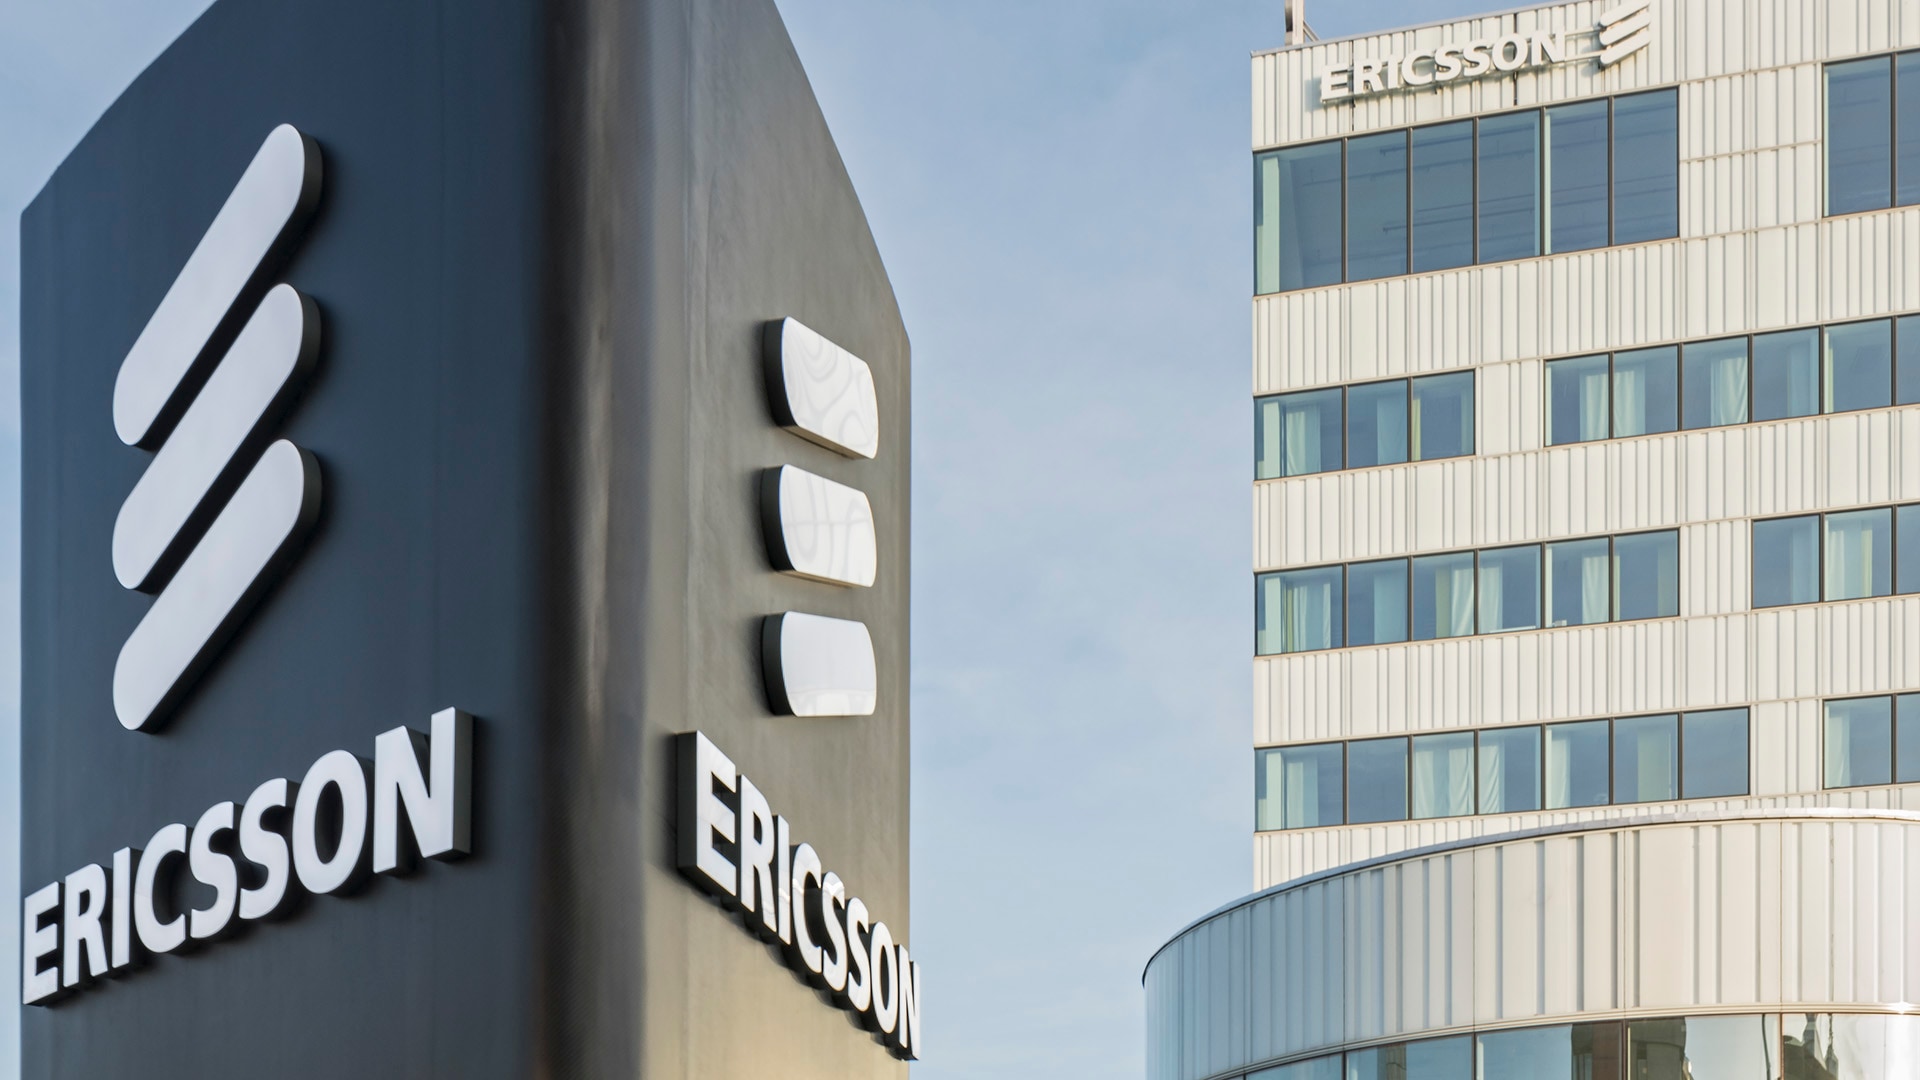 Ericsson agreed to buy cloud firm Vonage for $6.2 billion